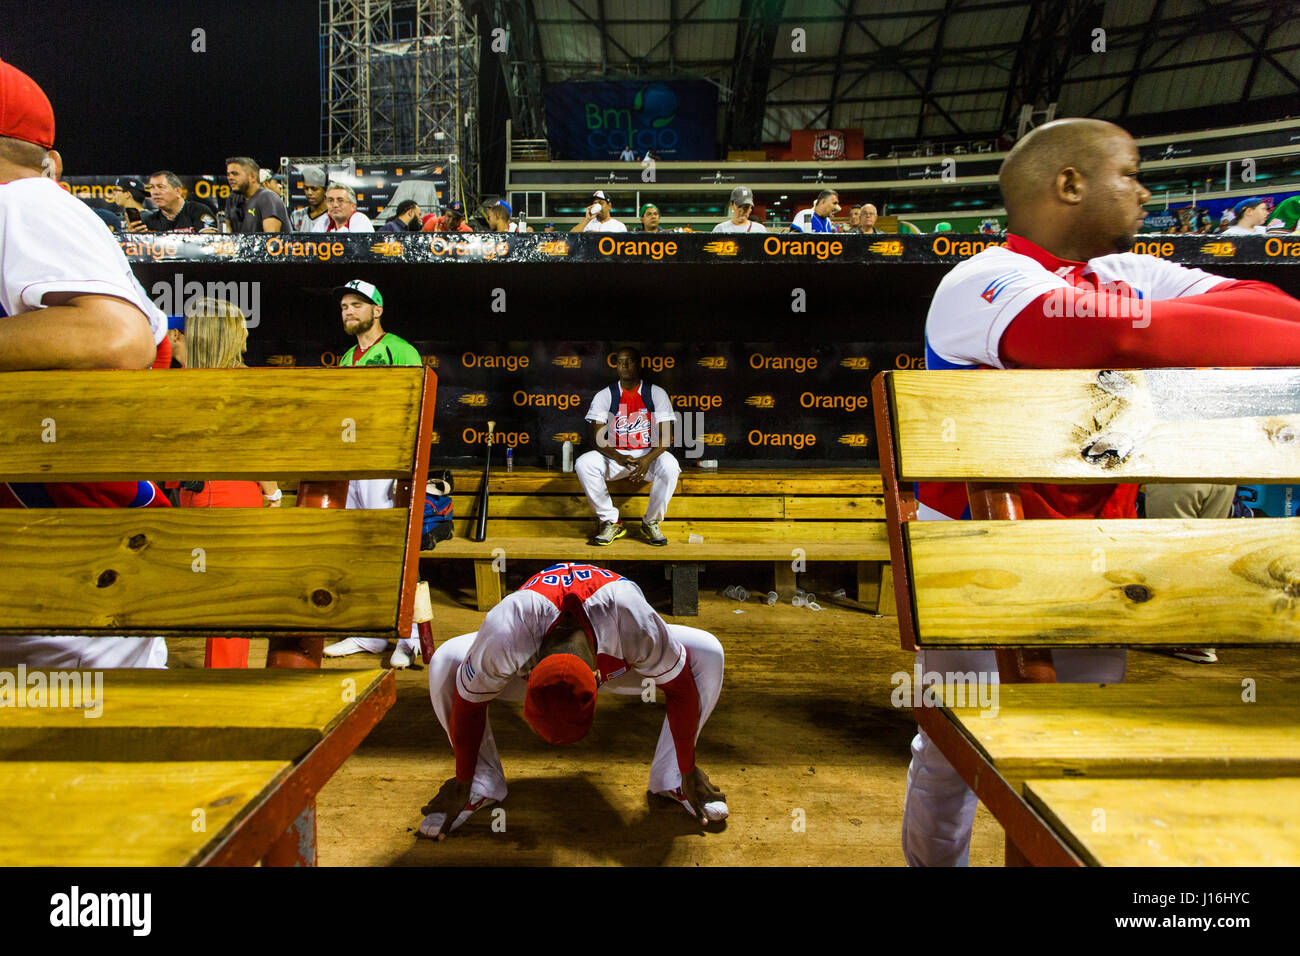 A Cuban Baseball Player Crouches Down In A Stretch In The Dugout In The Dominican Republic Stock Photo